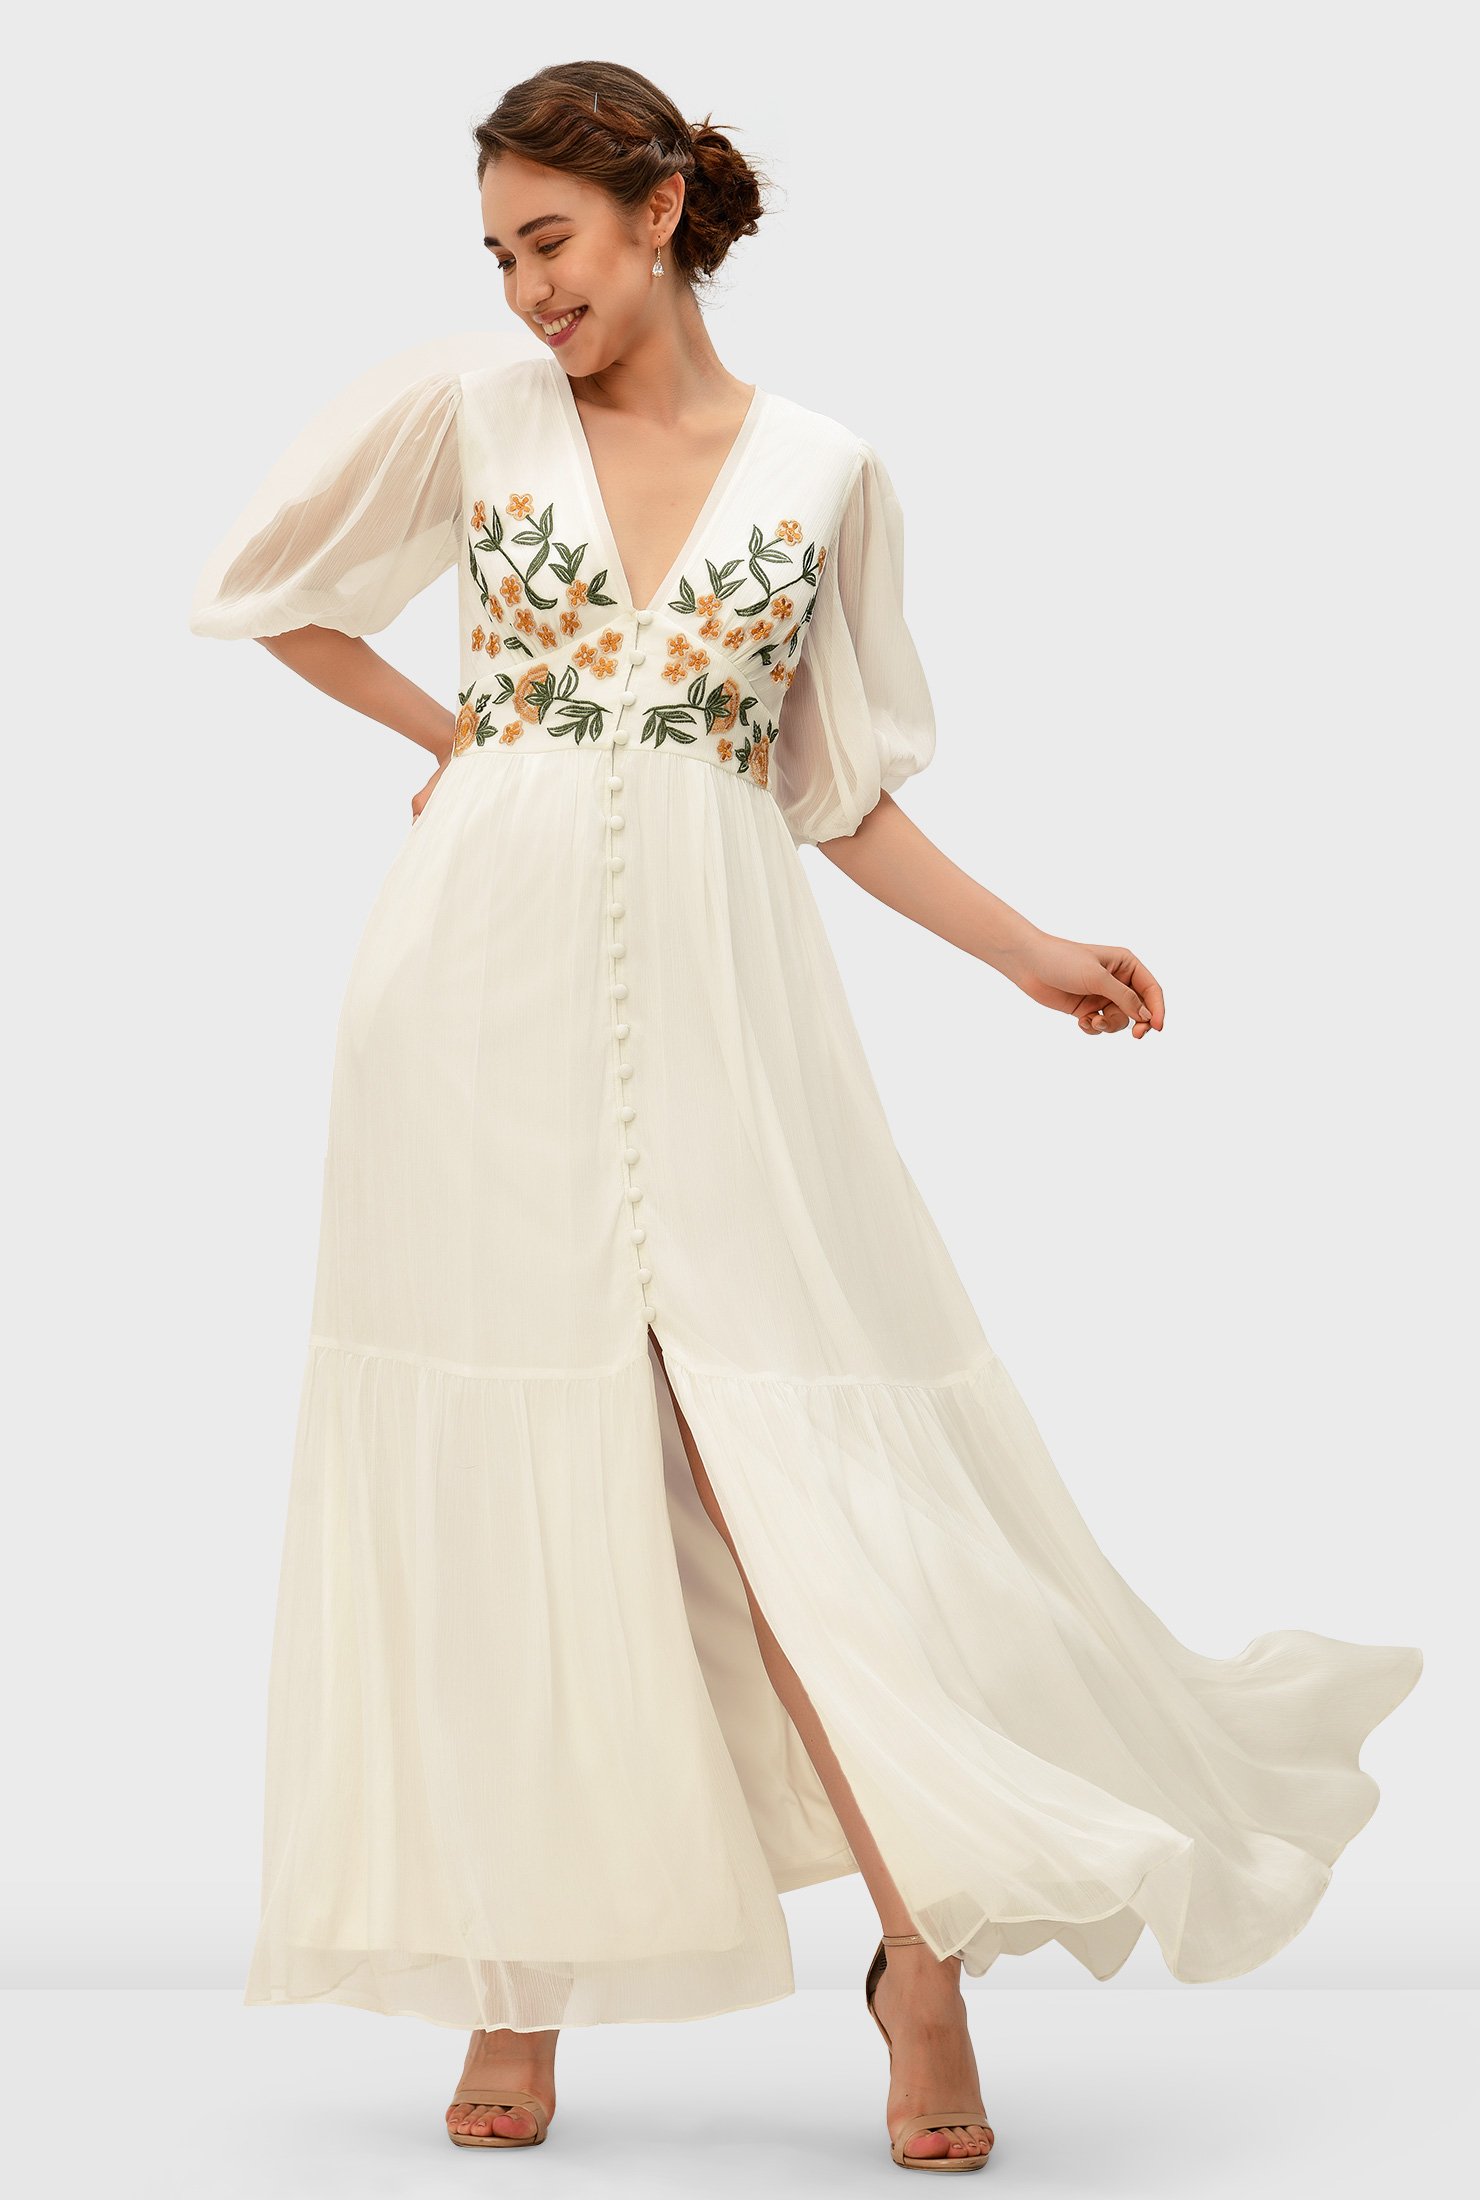 Floral embroidery chiffon banded empire dress